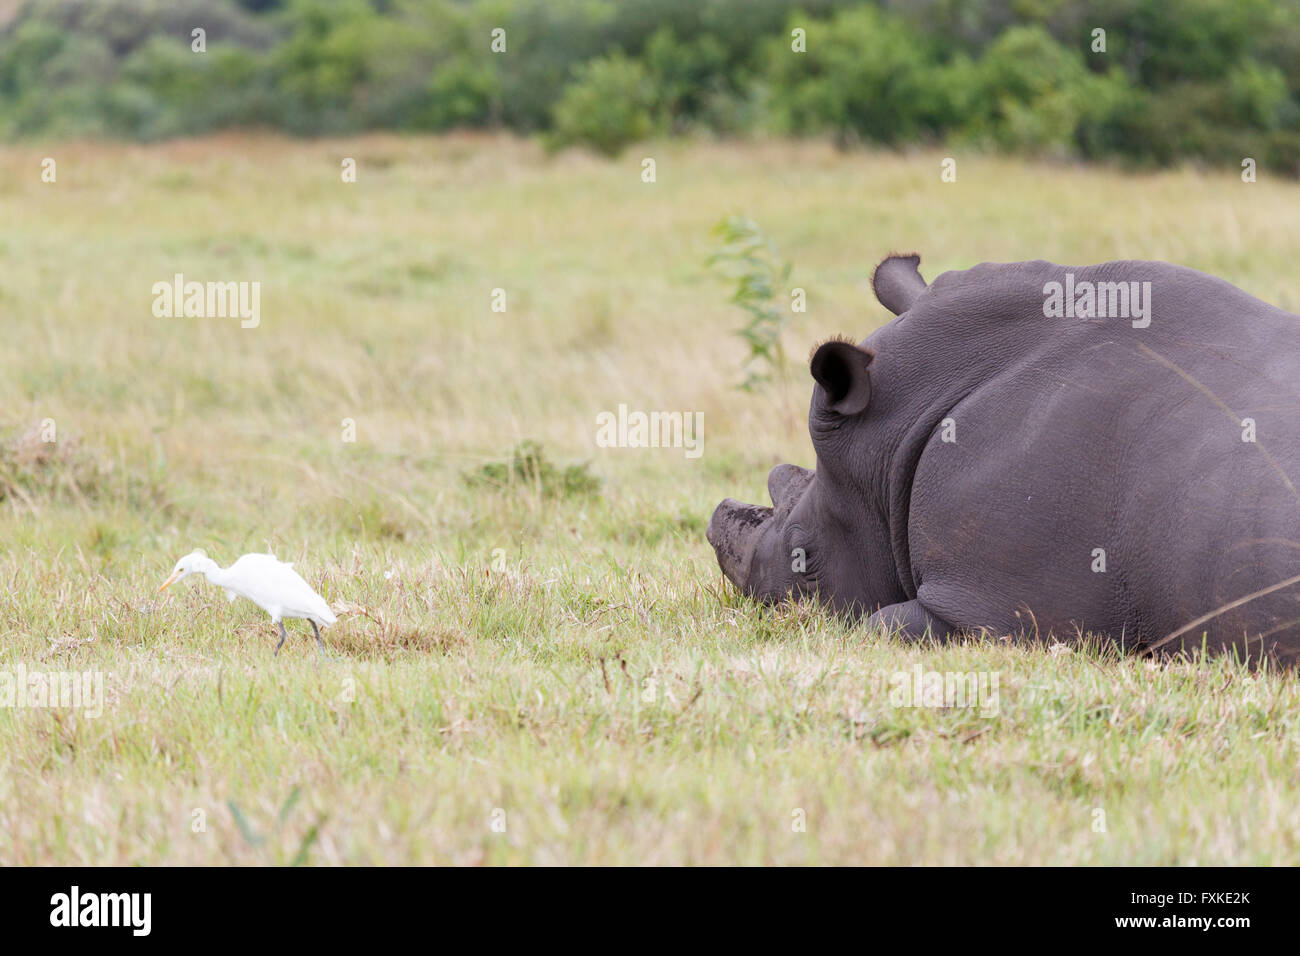 A rhinoceros, often abbreviated to rhino, is one of any five extant species of odd-toed ungulates in the family Rhinocerotidae, Stock Photo